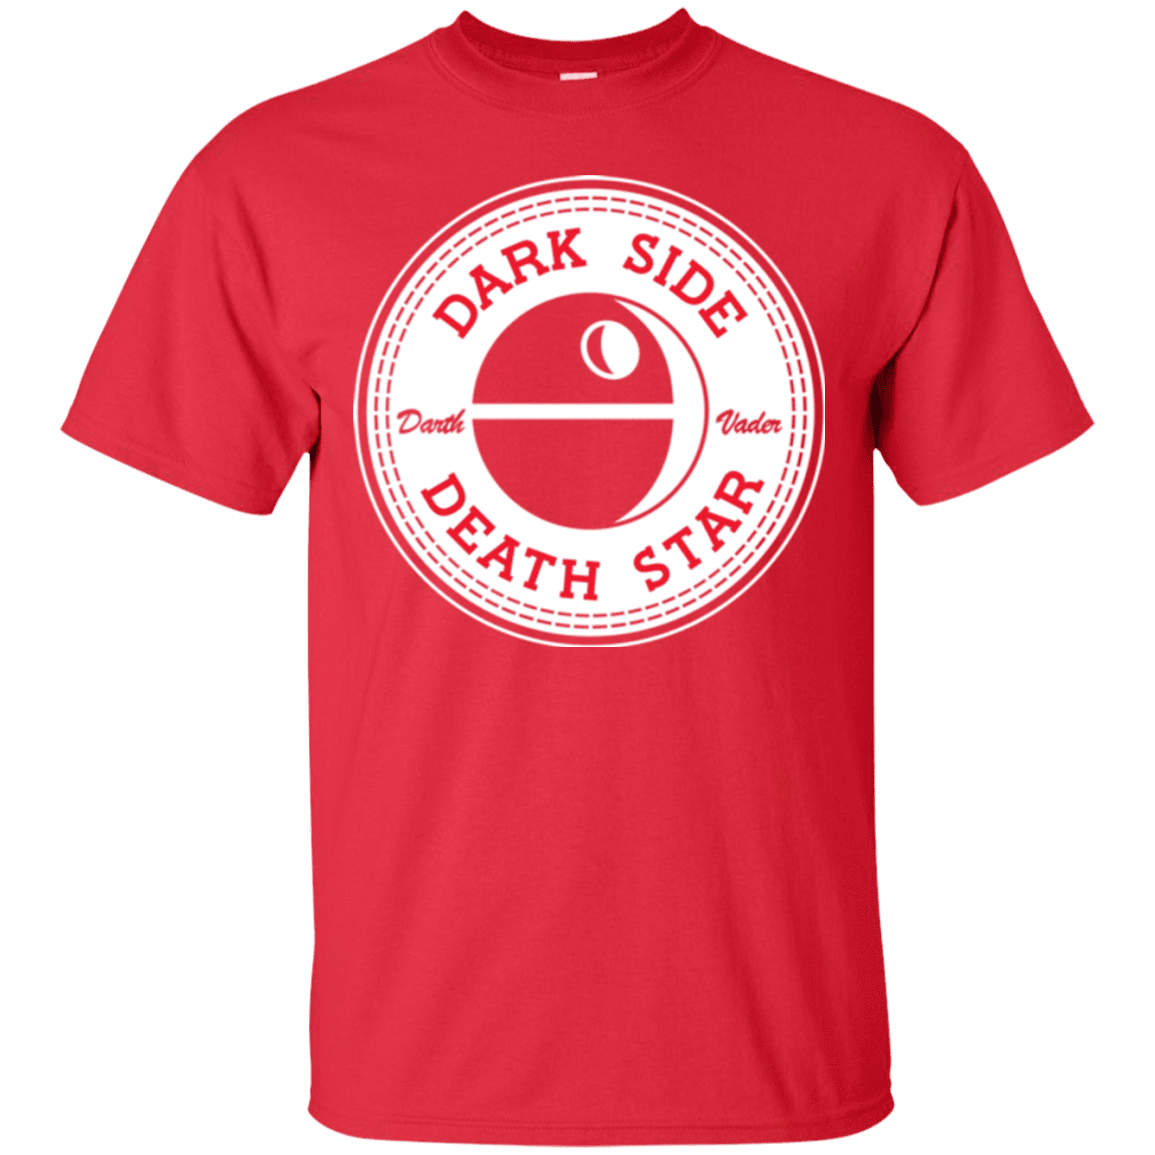 T-Shirts Red / Small Death Star T-Shirt